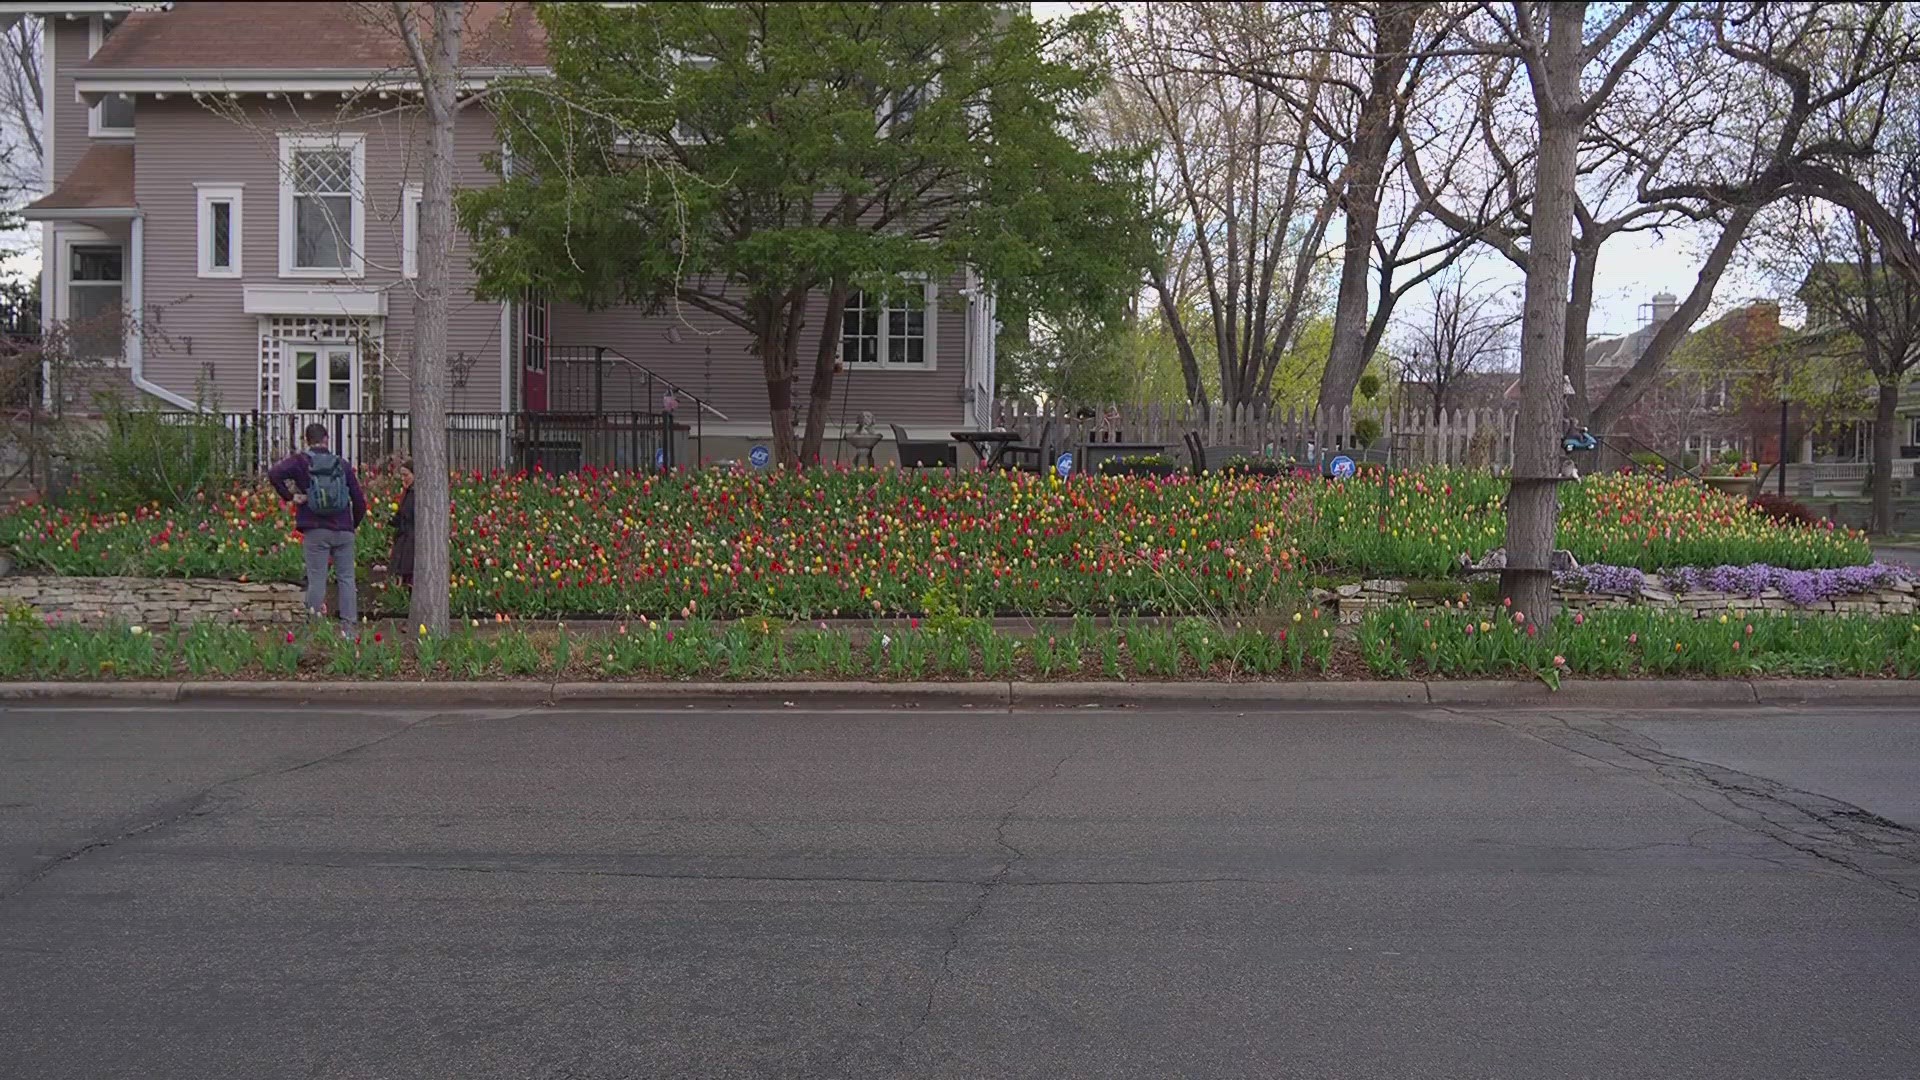 Thousands of tulips are on display in a yard at the corner of 25th Street and Humboldt Avenue South.